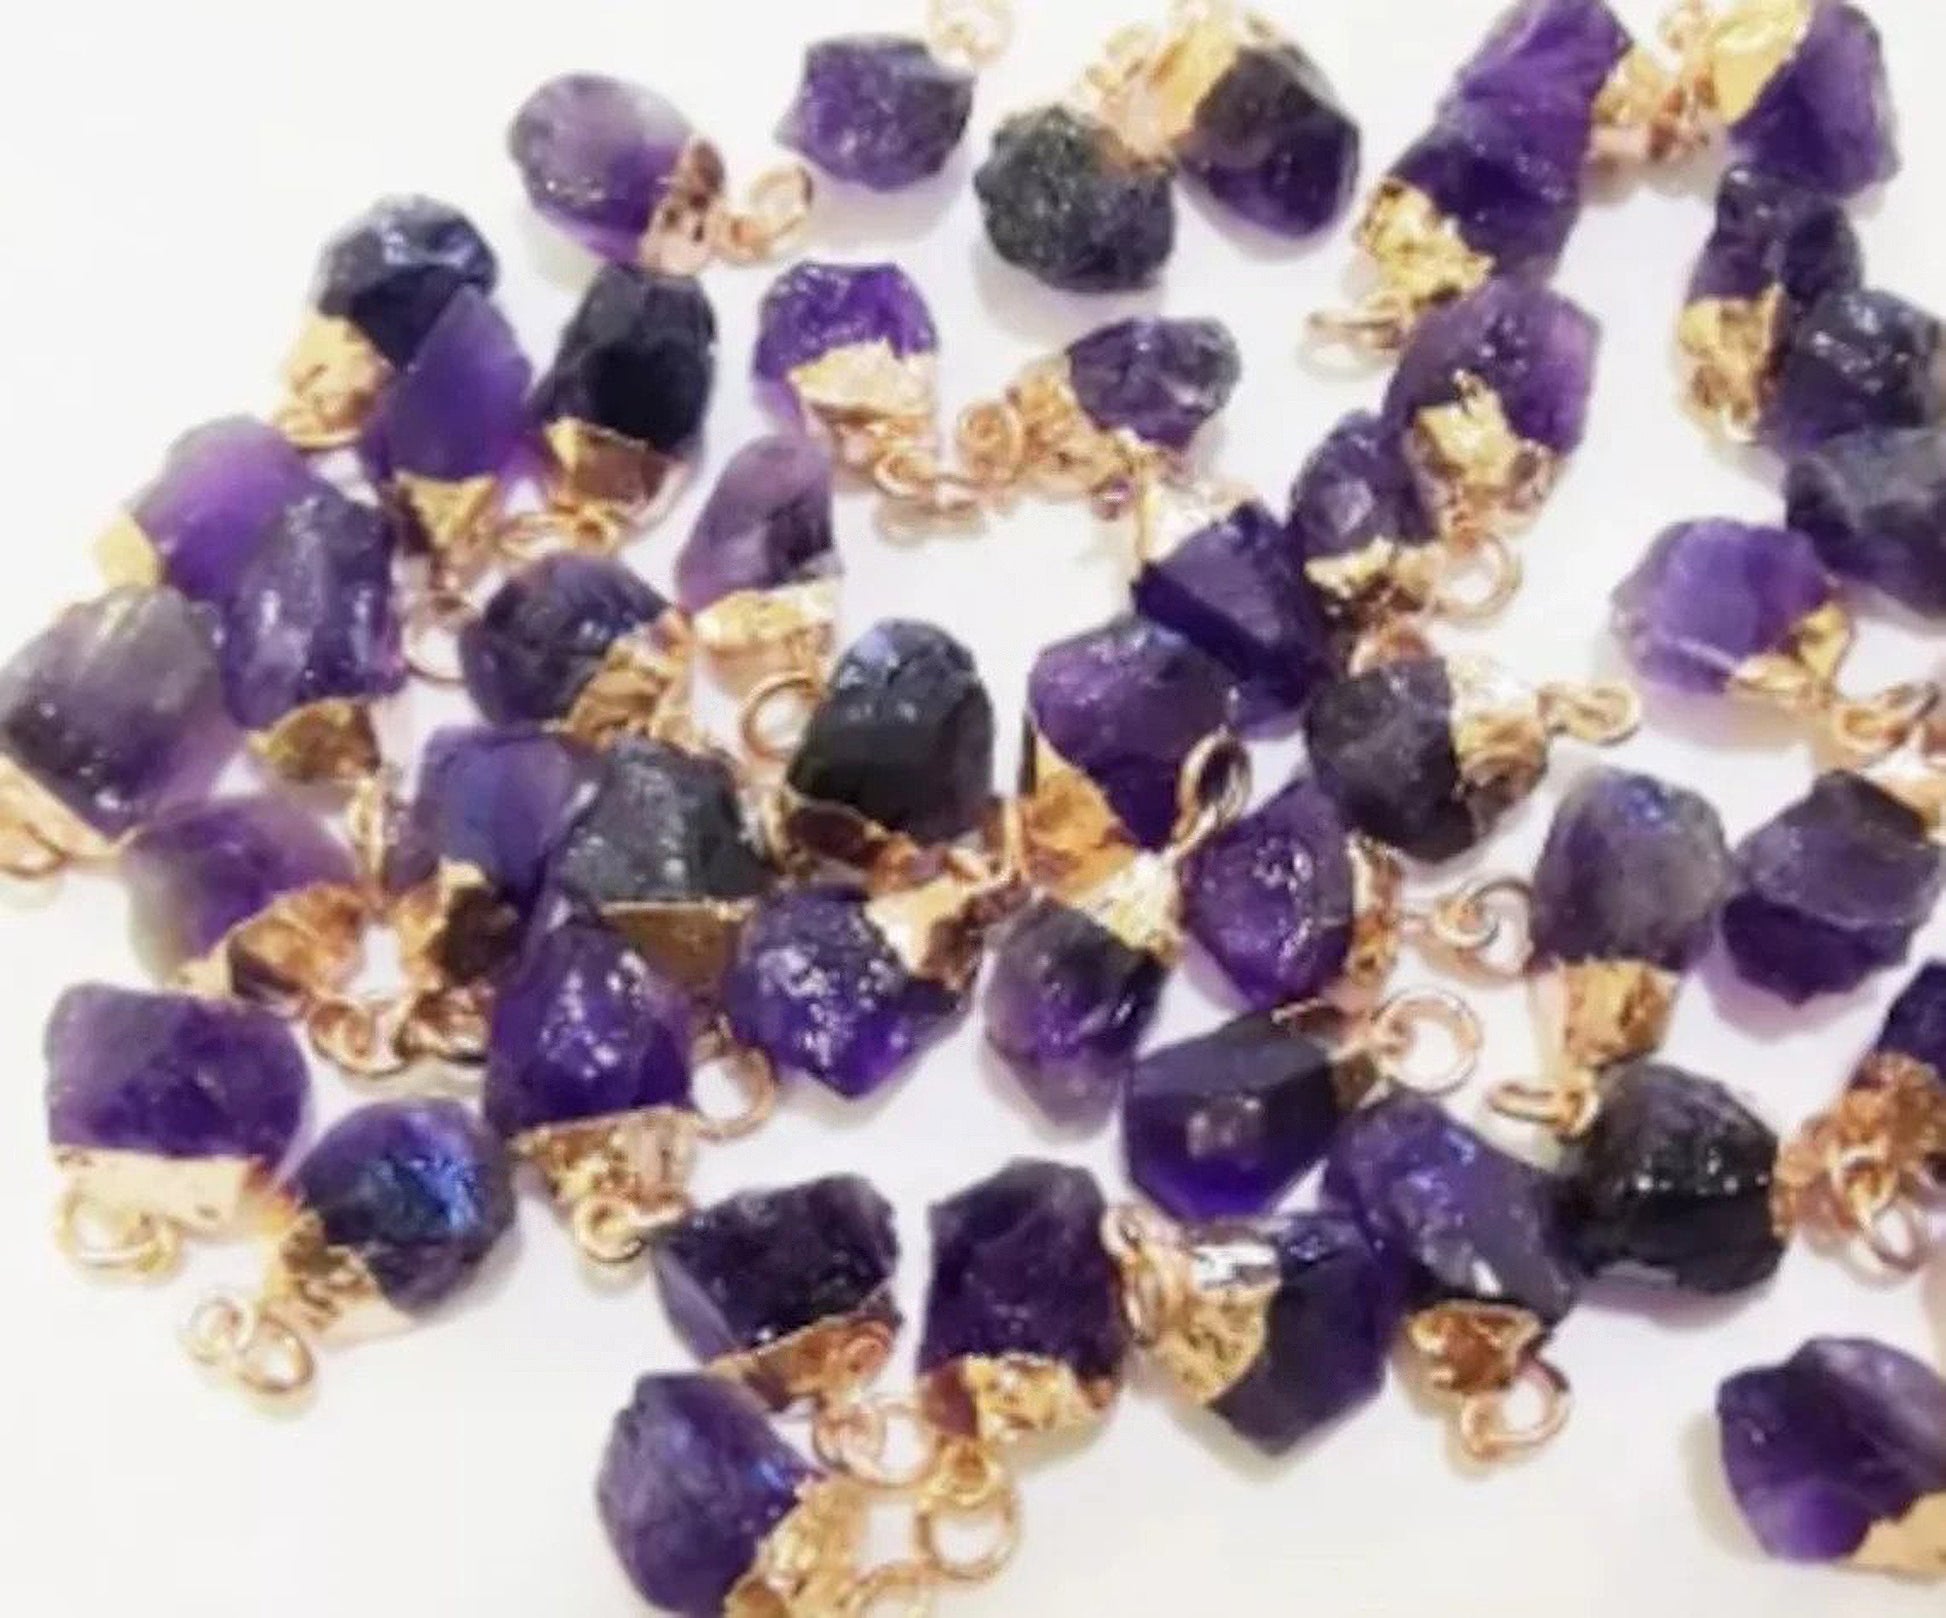 Small amethyst crystals in their raw and unpolished form have been electroplated with gold to create dainty jewelry pendants which lay in a pile together on top of a plain white surface.